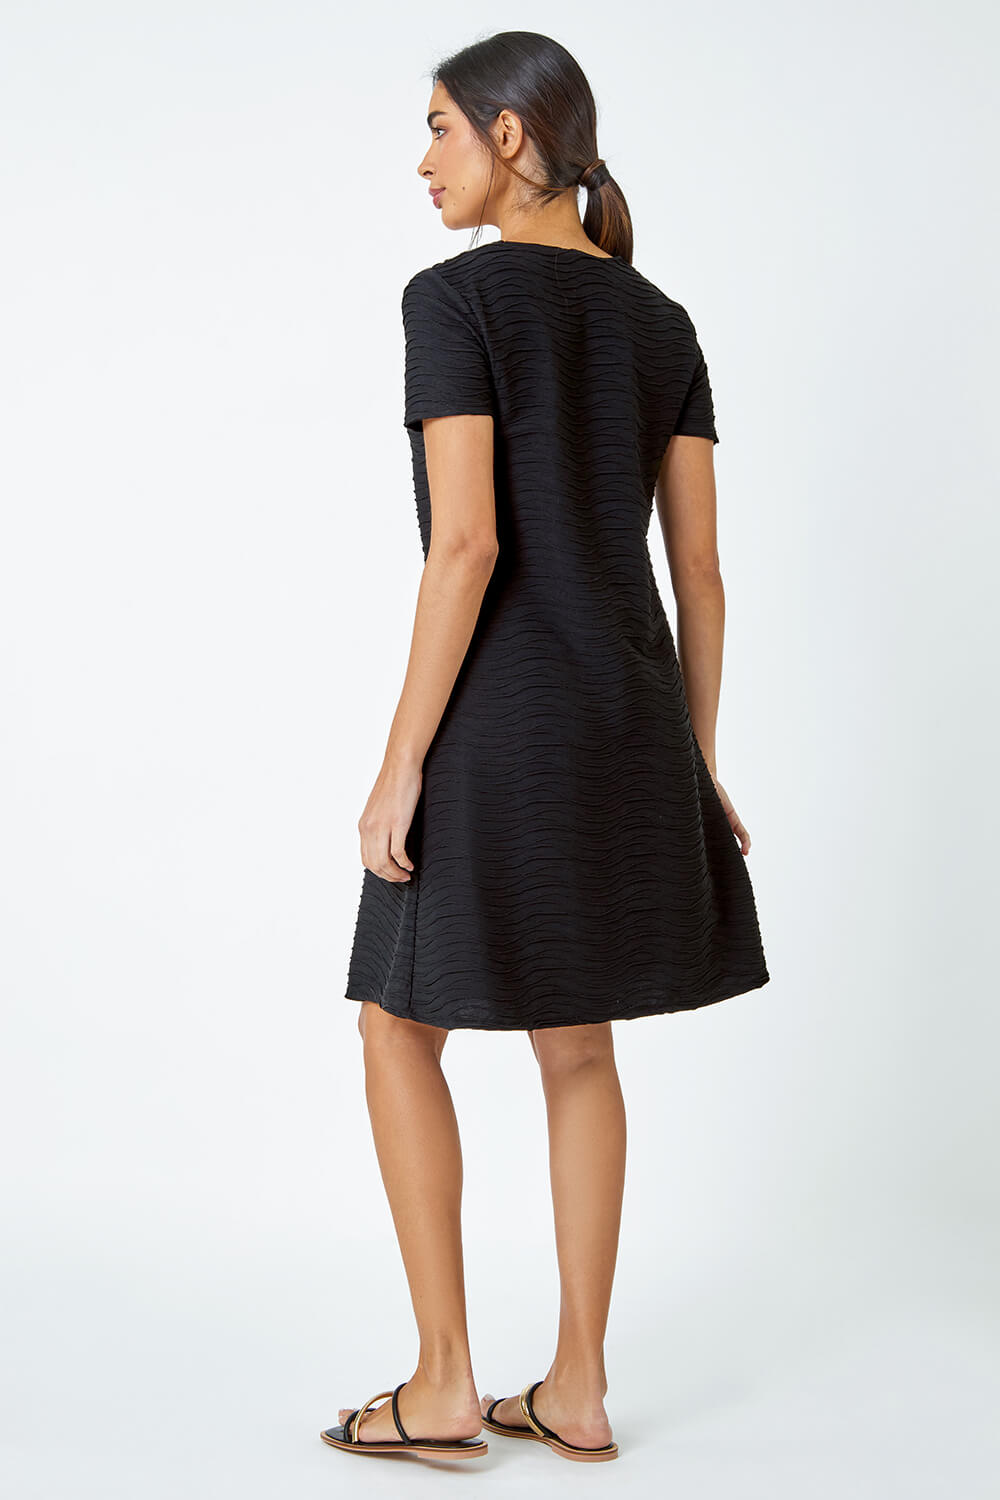 Black Textured A-Line Stretch Dress, Image 3 of 5